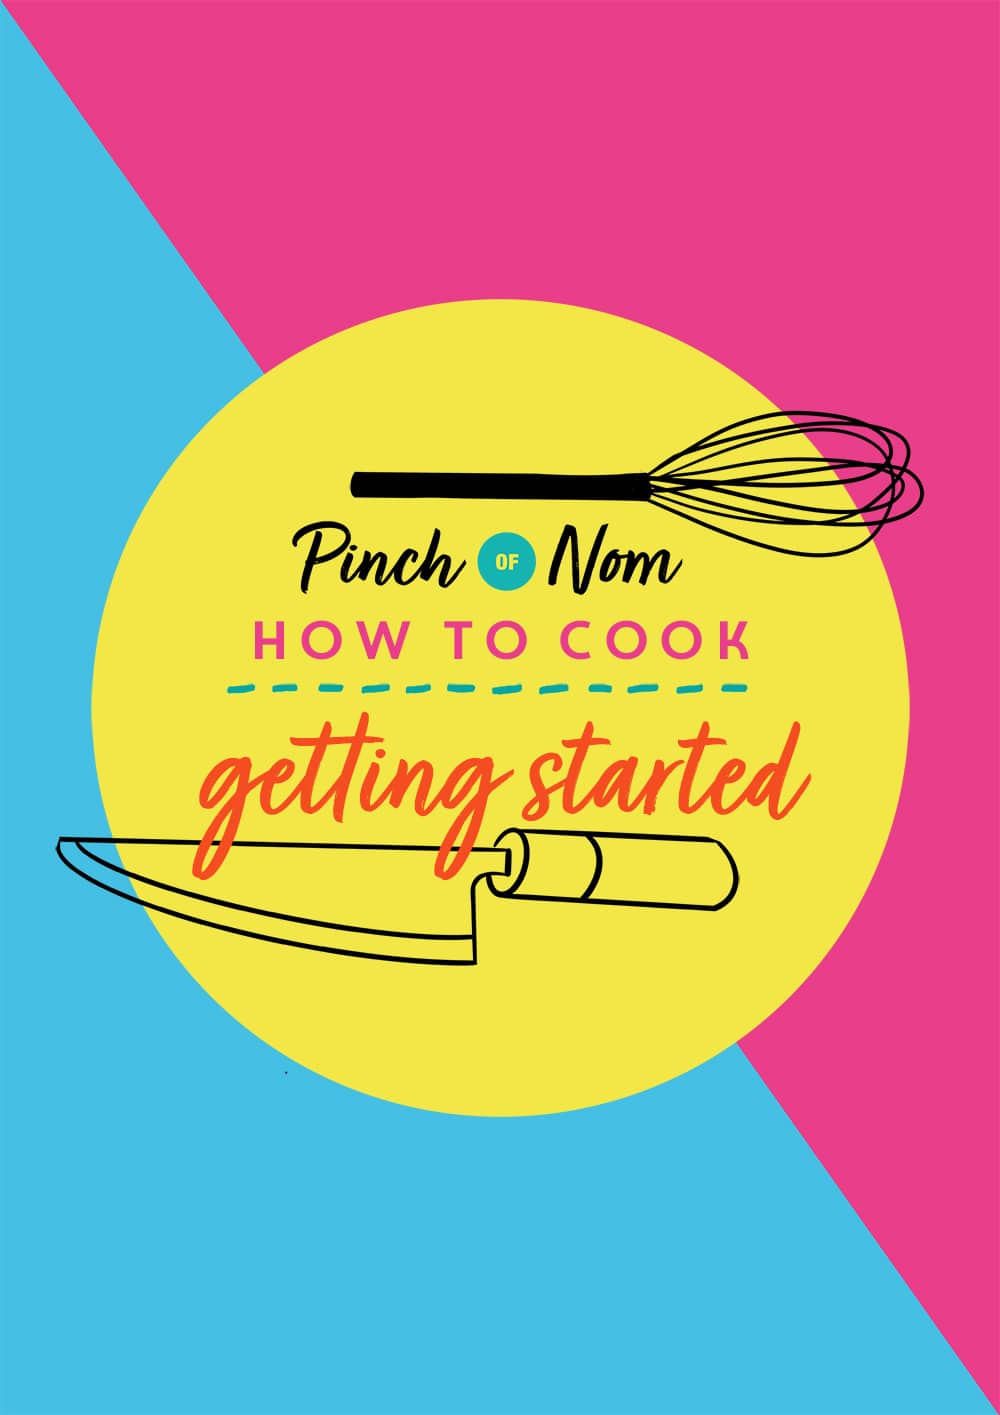 HOW TO COOK - Getting Started - Pinch of Nom Slimming Recipes